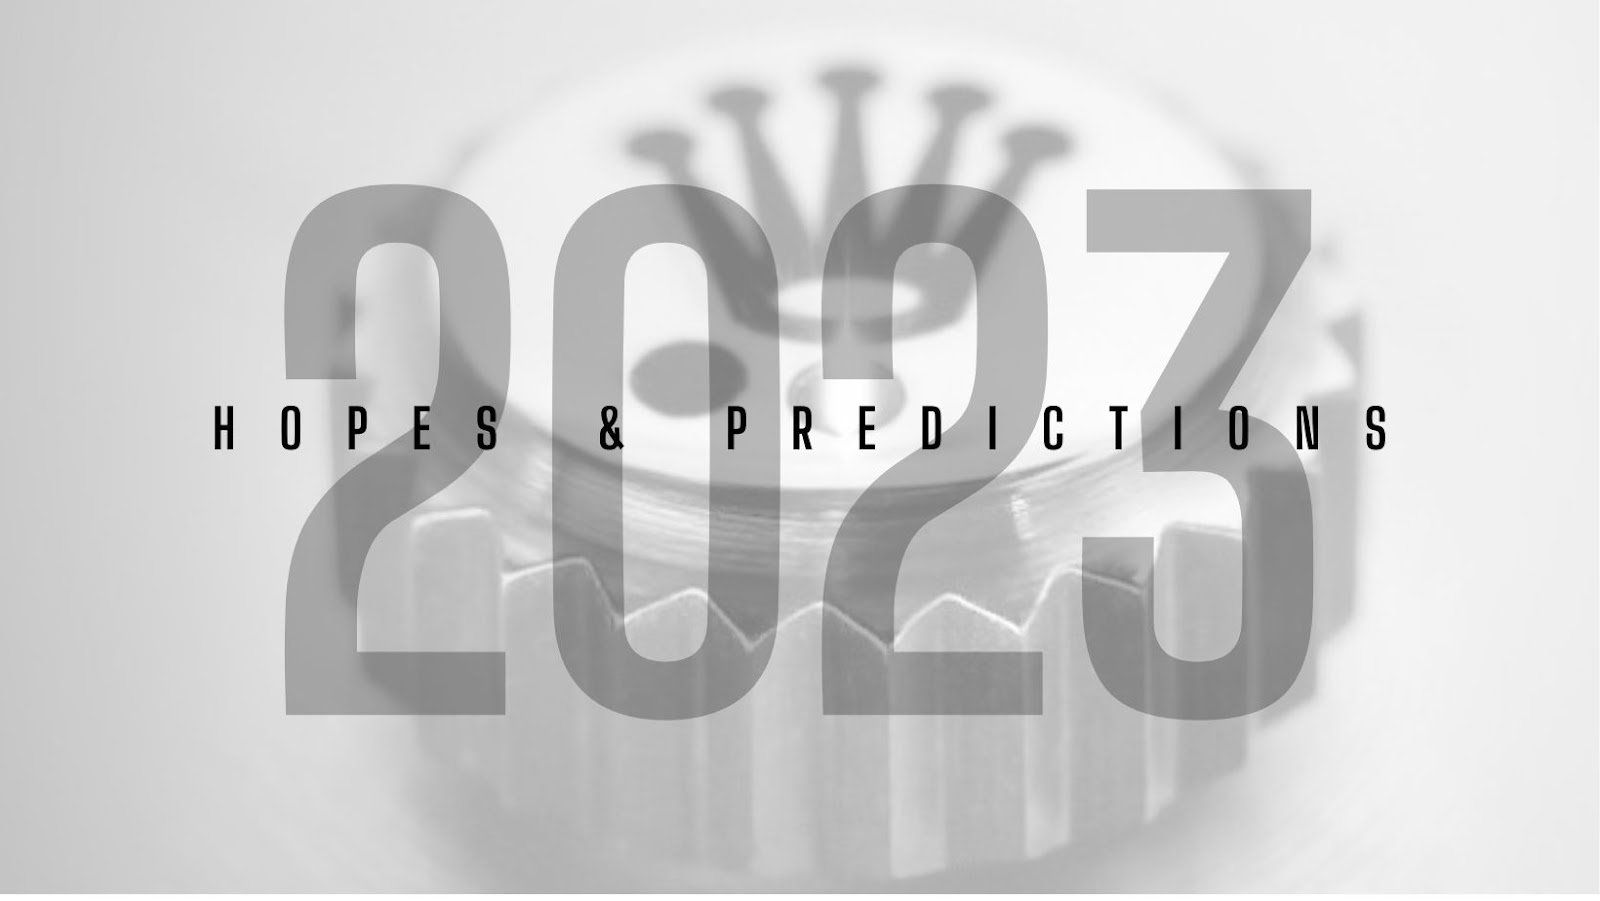 THM’s Watch Predictions and Projections For 2023